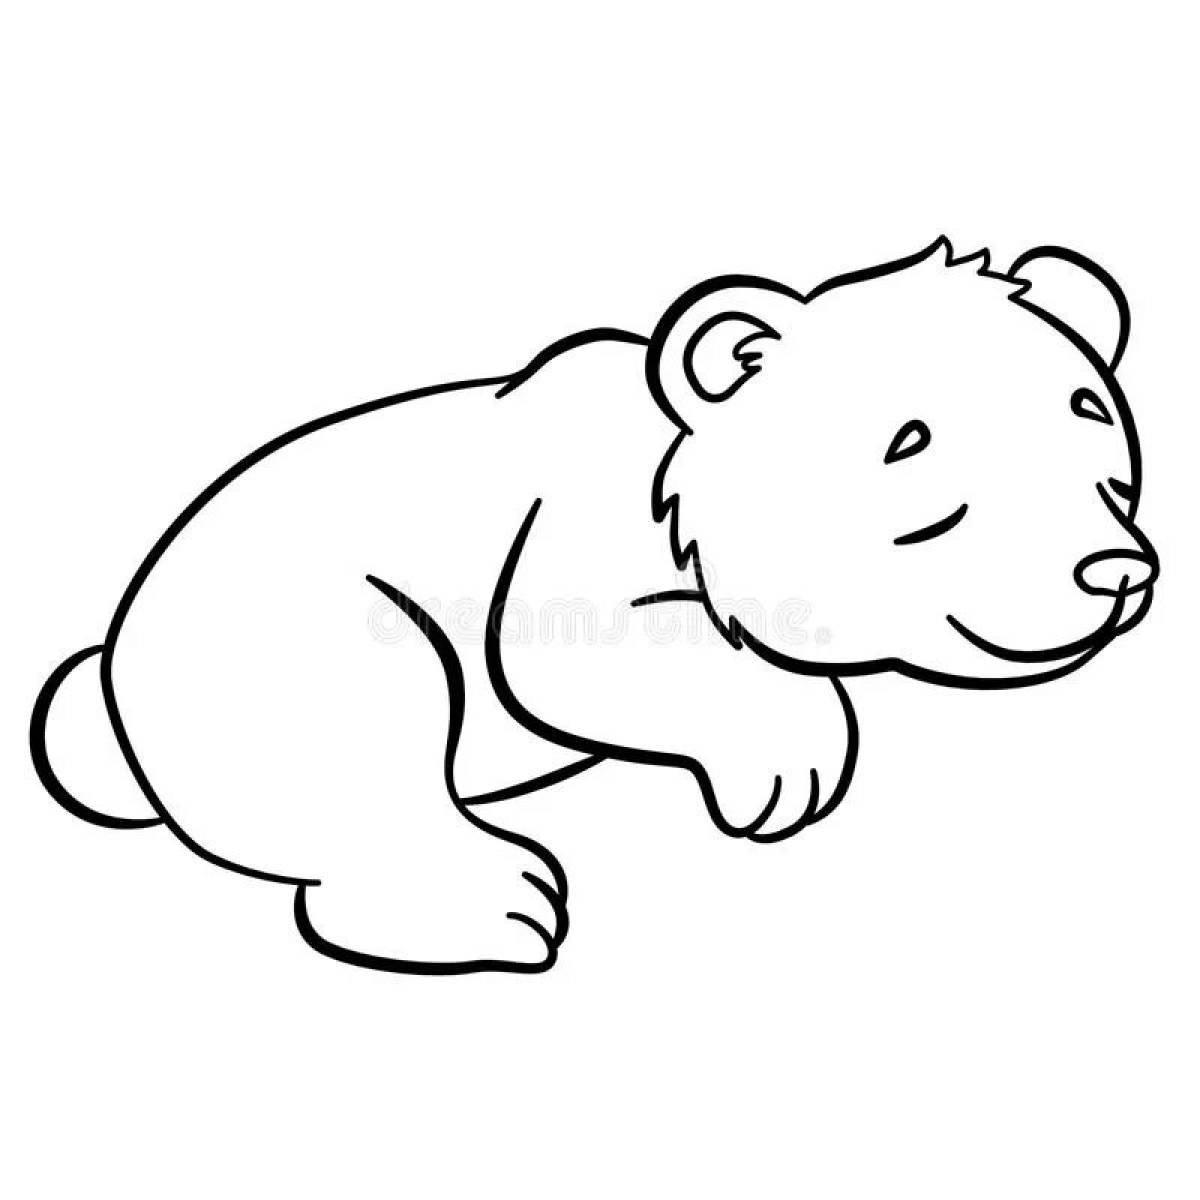 Silent teddy bear sleeping coloring page